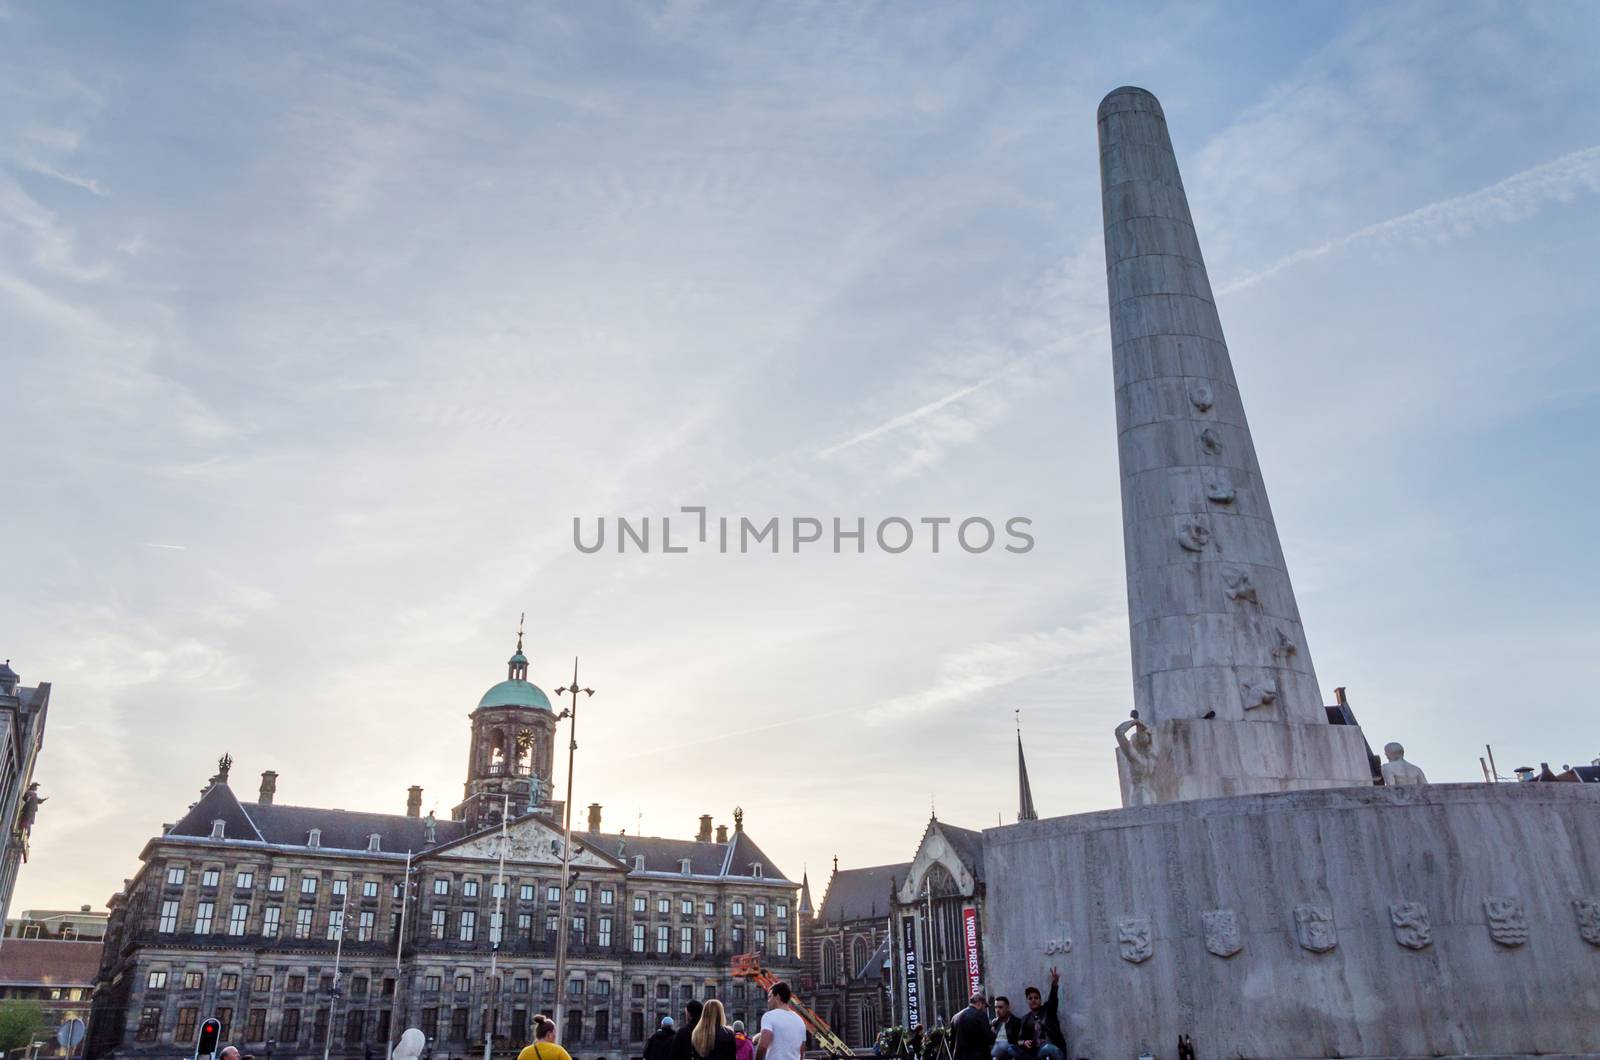 Amsterdam, Netherlands - May 8, 2015: People visit The Dam monument in Amsterdam by siraanamwong